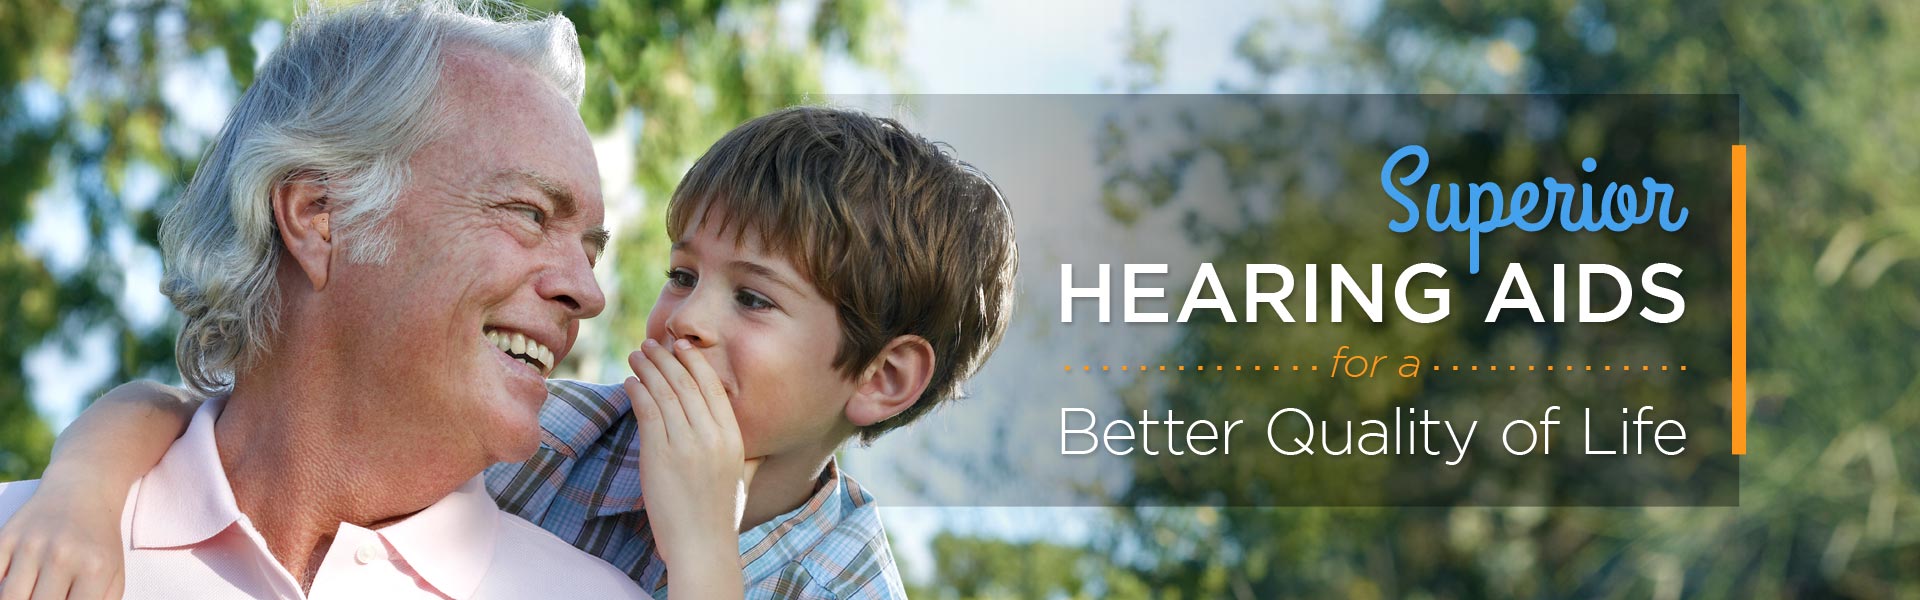 superior hearing aids for a better quality of life